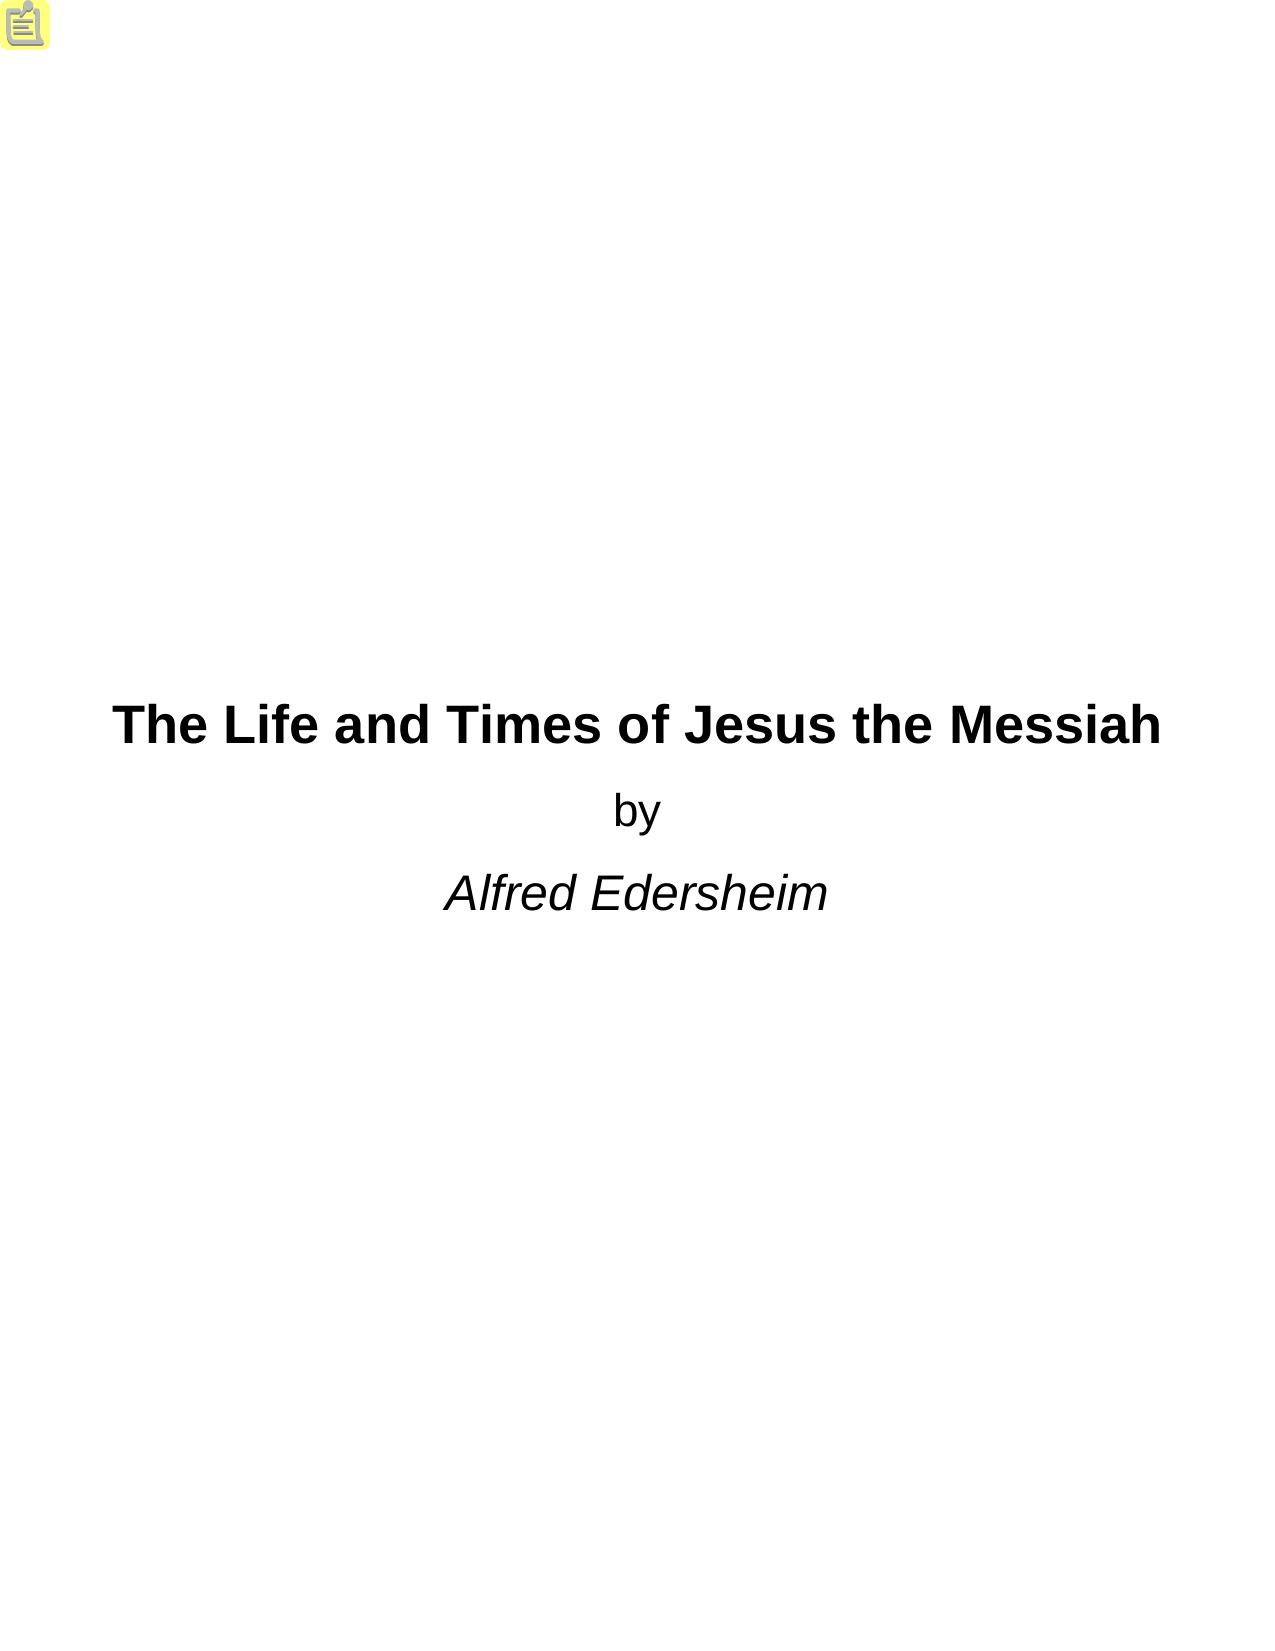 The Life and Times of Jesus the Messiah by Alfred Edersheim